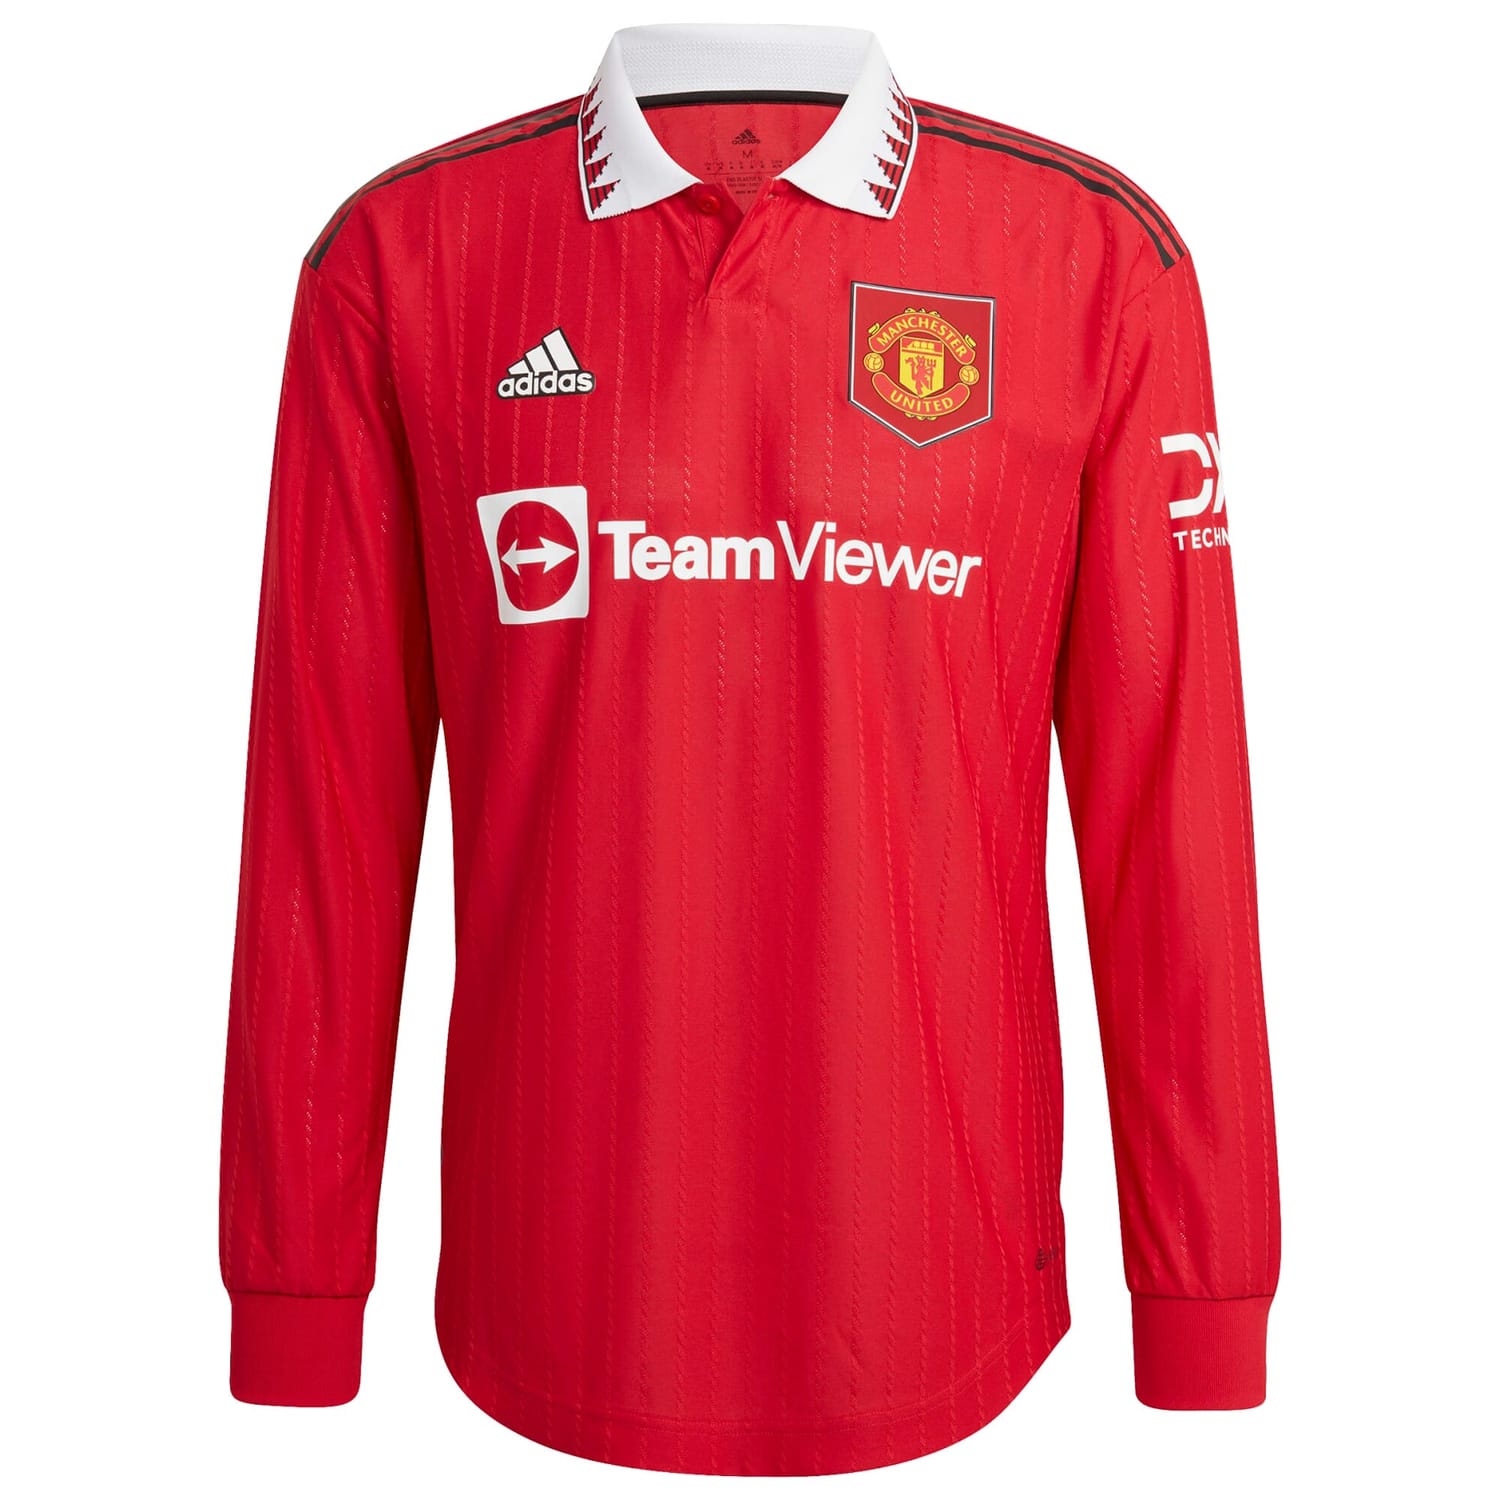 Premier League Manchester United Home Authentic Jersey Shirt Long Sleeve 2022-23 player Wout Weghorst 27 printing for Men